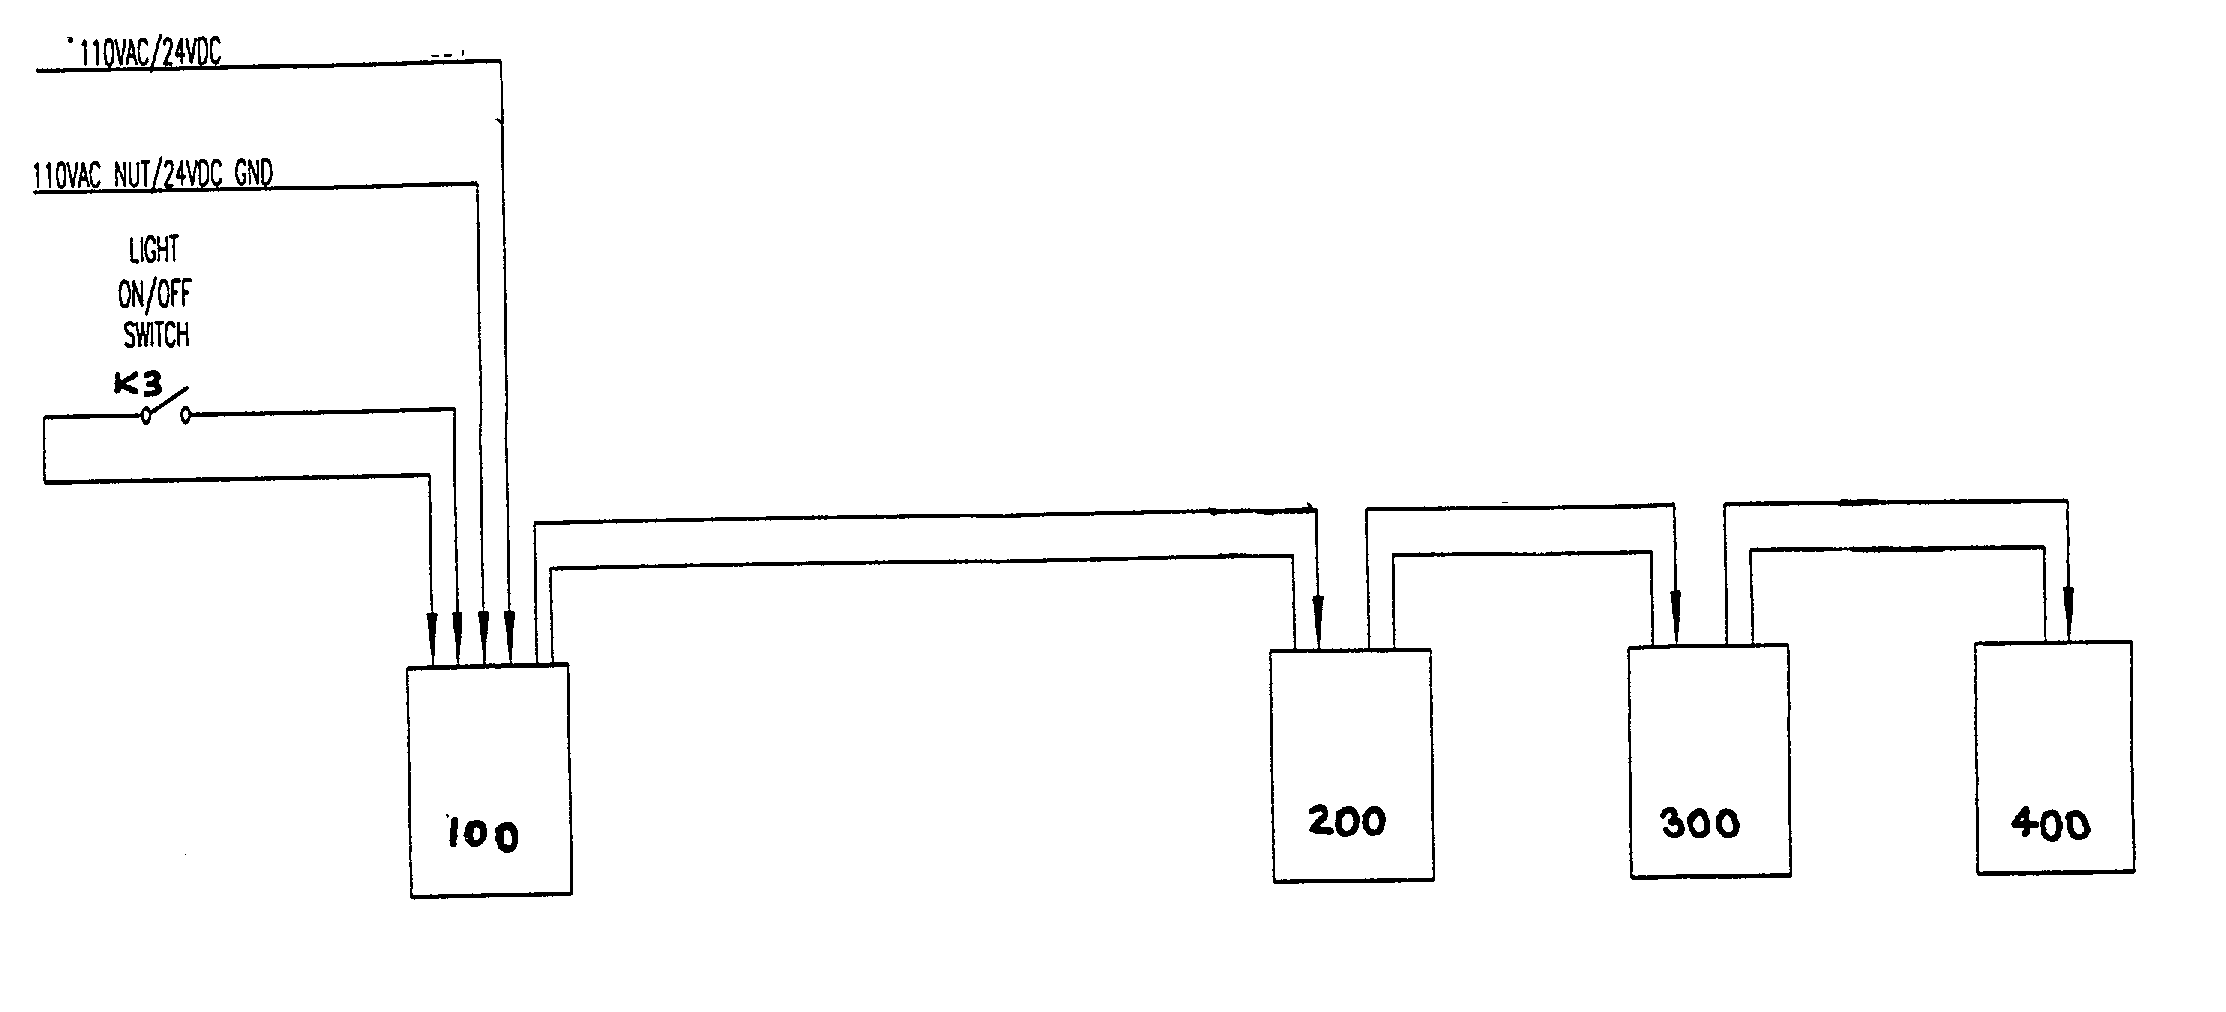 wiring diagram for tailgate on a ez pack hercules